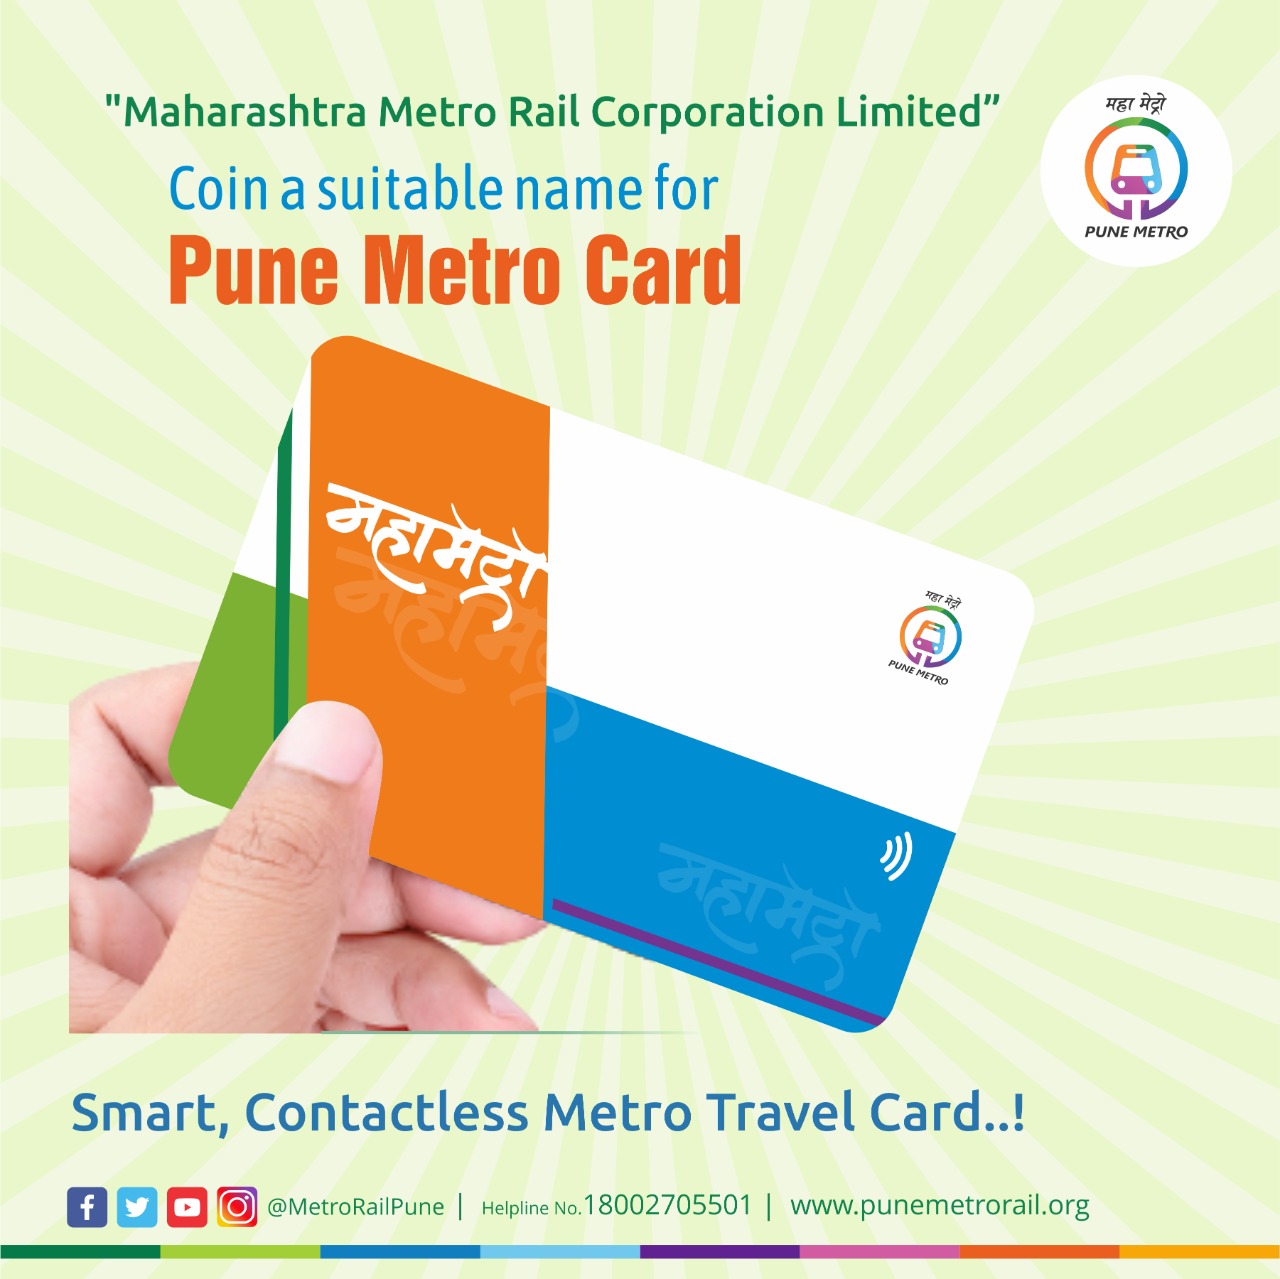 pune-metro-rail-on-twitter-coin-a-suitable-name-for-pune-metro-card